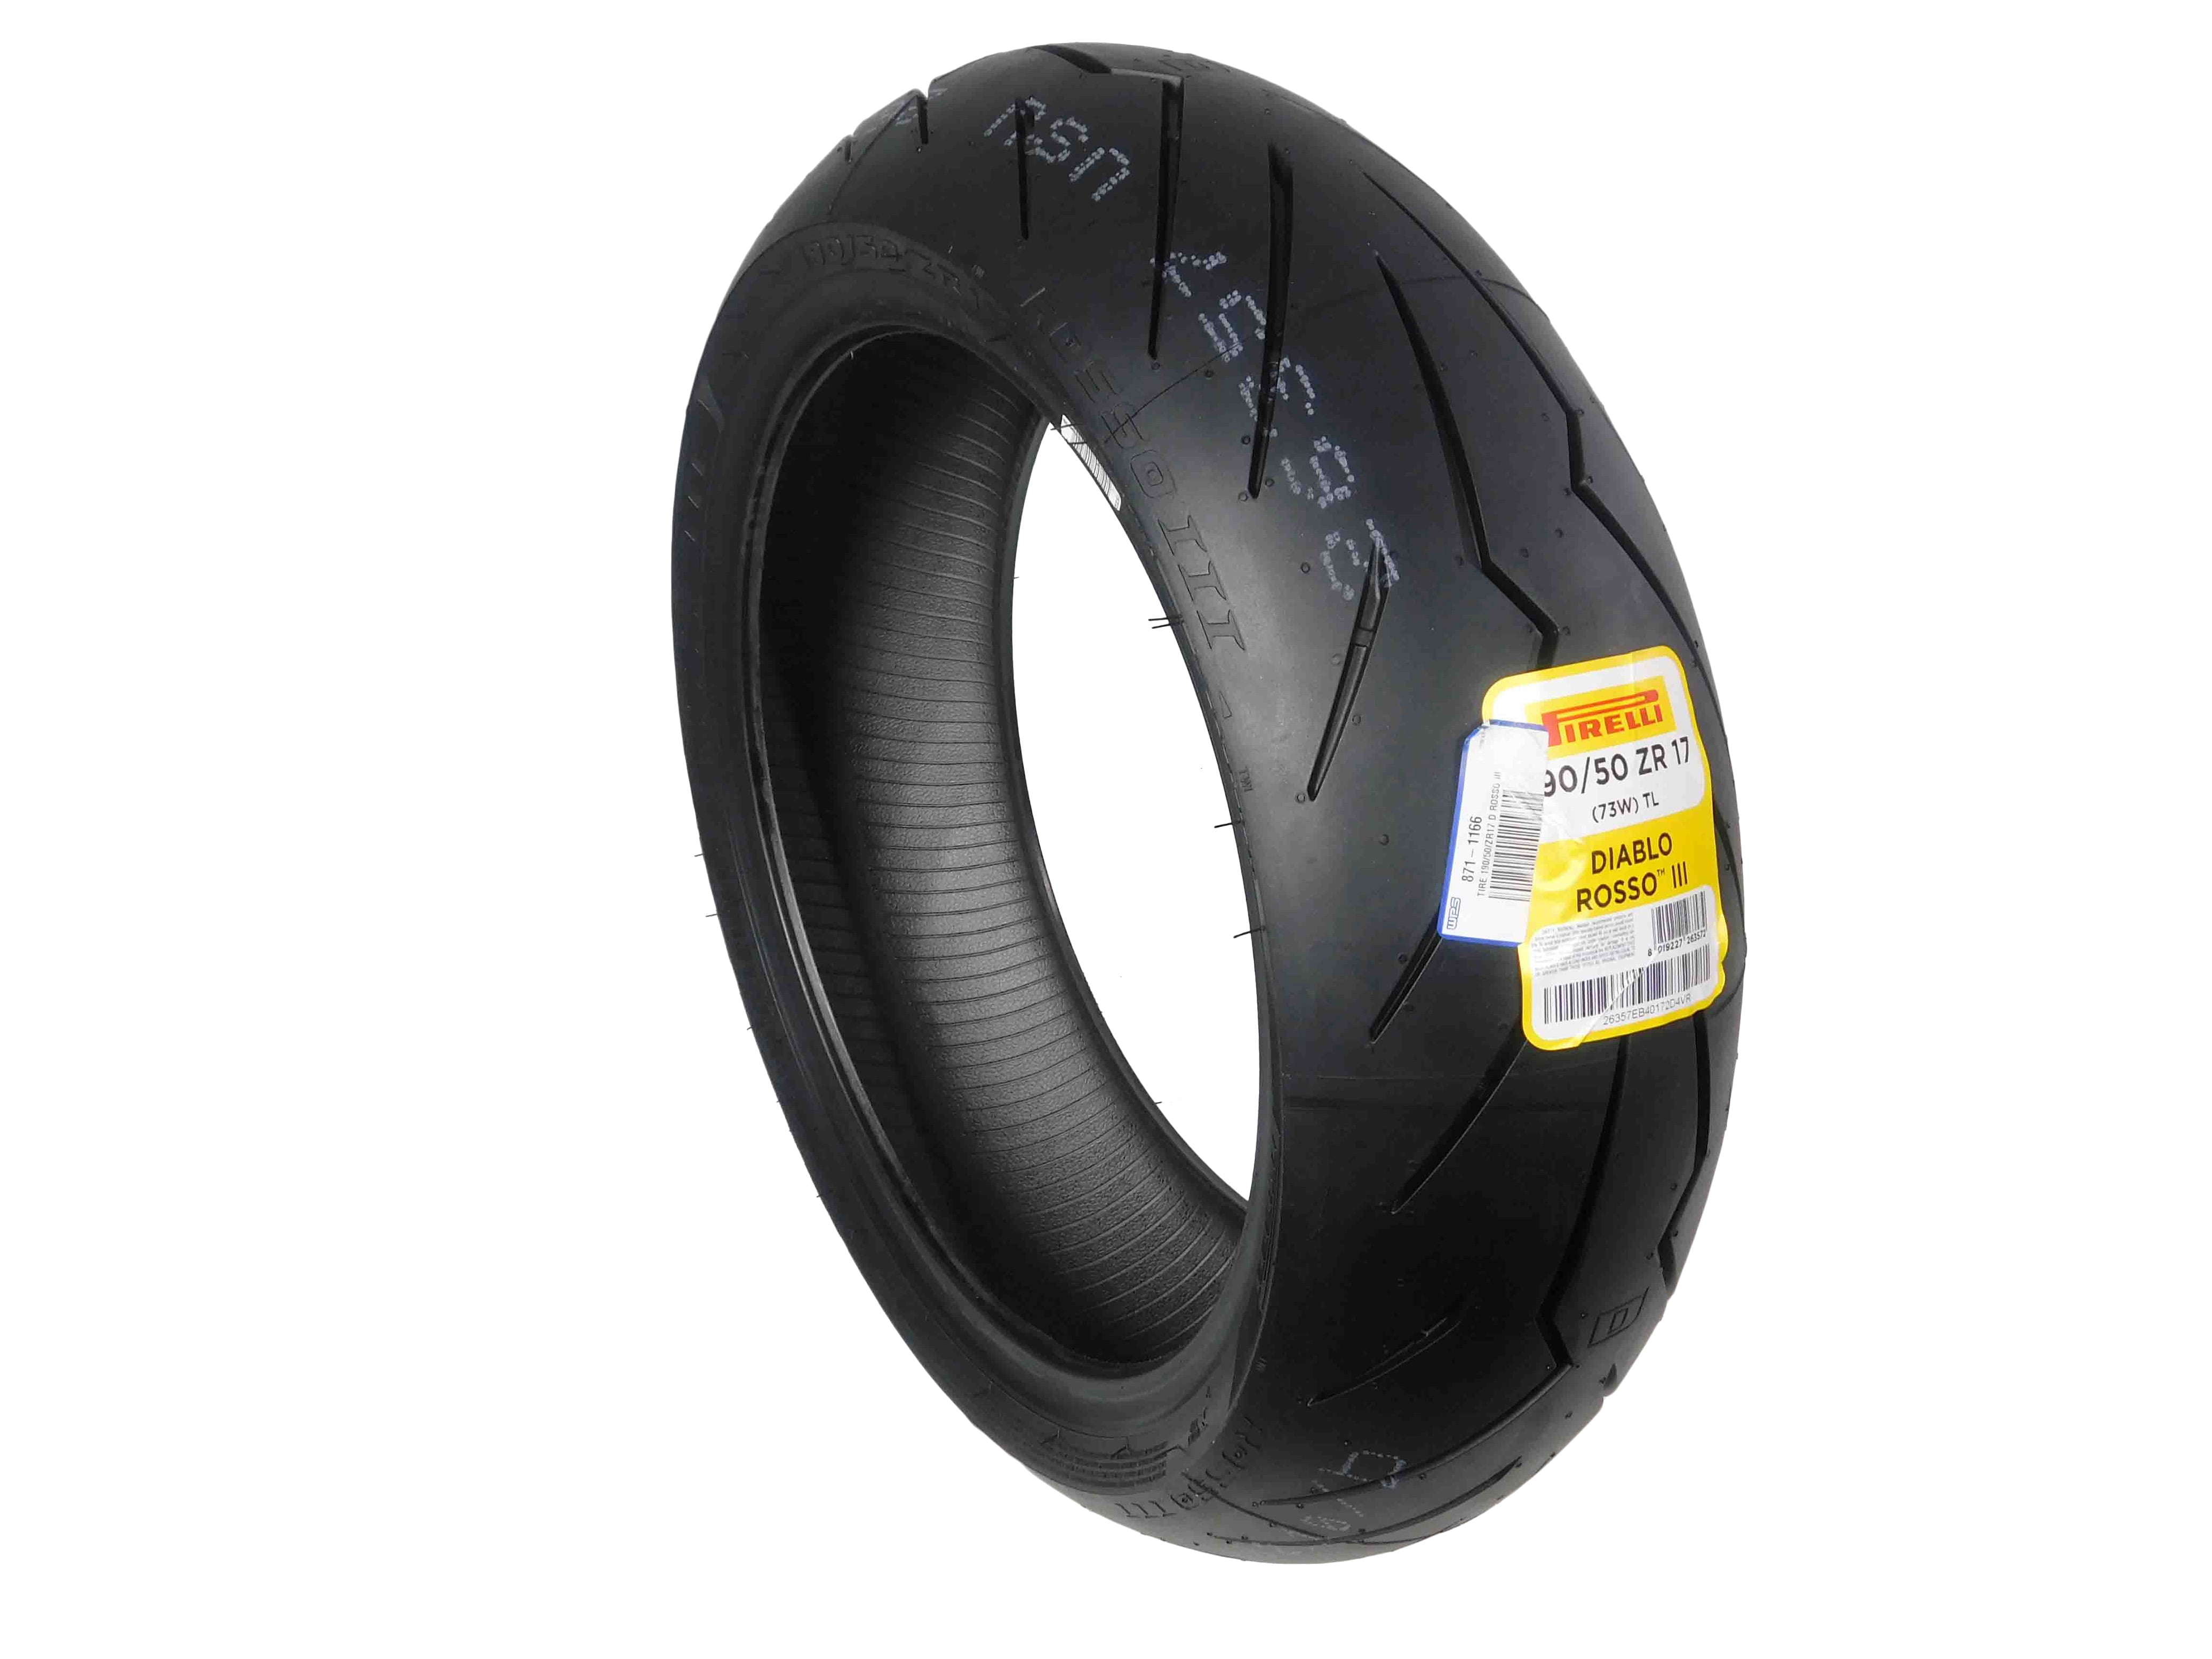 Rear Position: Rear Tire Construction: Radial 2127000 Tire Application: Race Rim Size: 17 W Tire Size: 180/60-17 Tire Type: Street Pirelli Diablo Rosso Corsa Tire 180/60Zr-17 Speed Rating: Load Rating: 75 